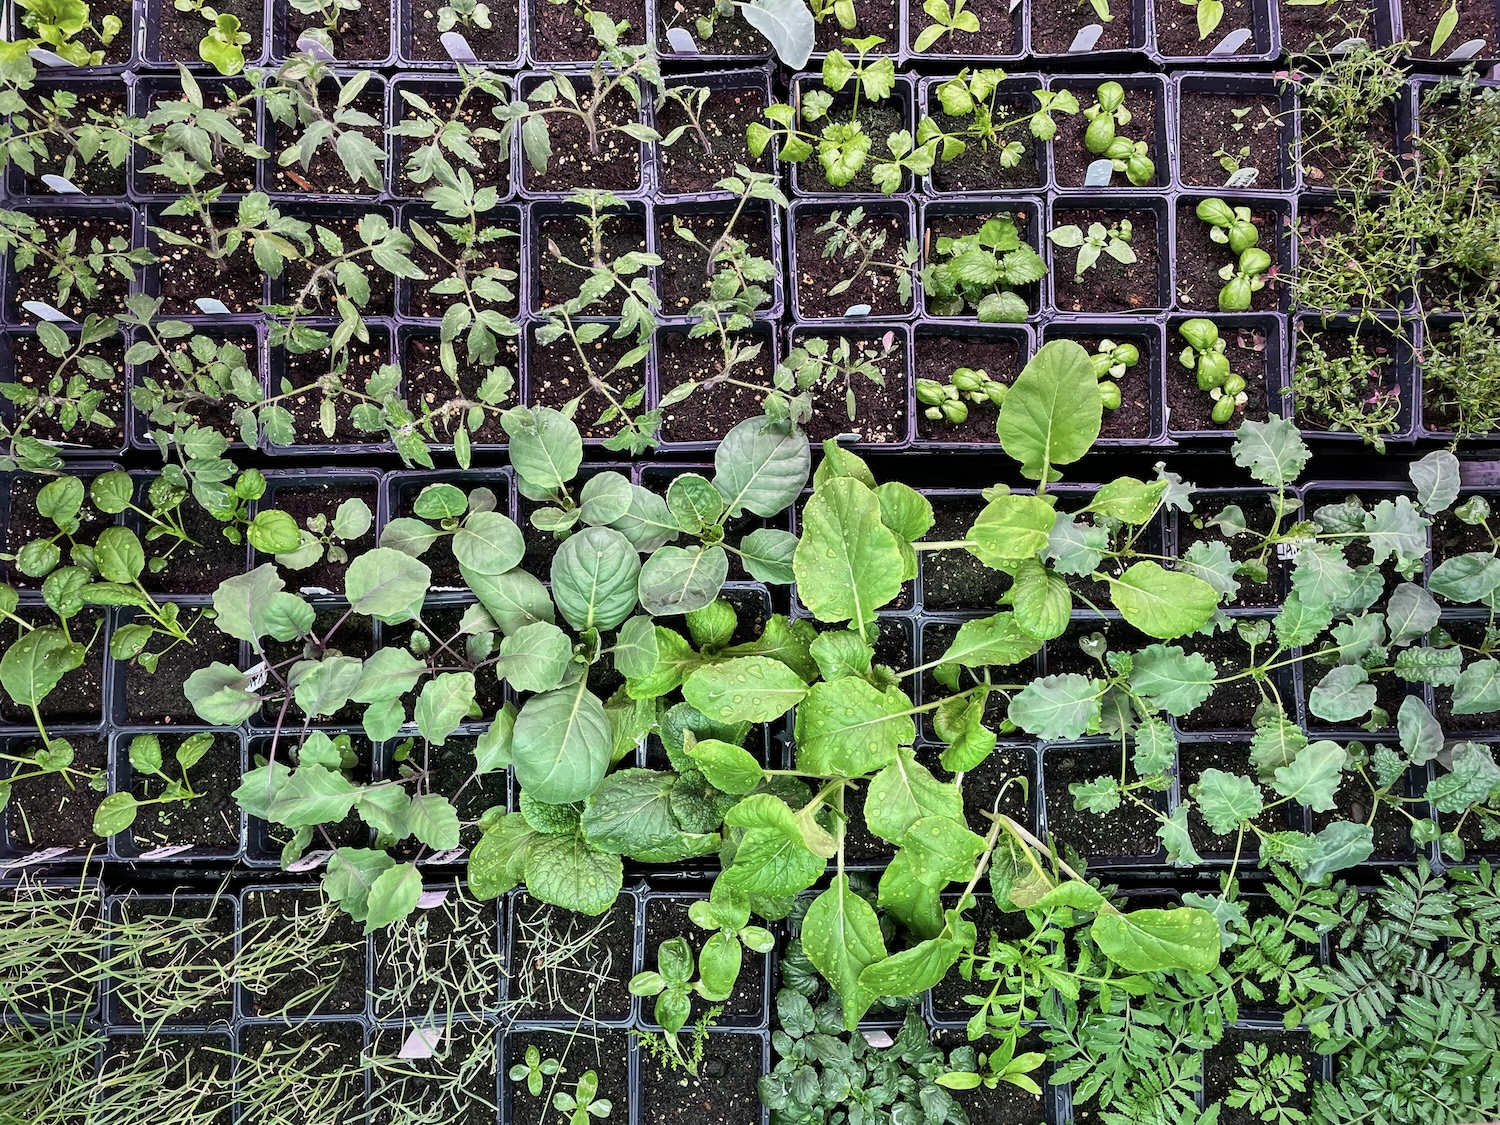 Multiple trays of seedlings growing next to each other in a cluster.